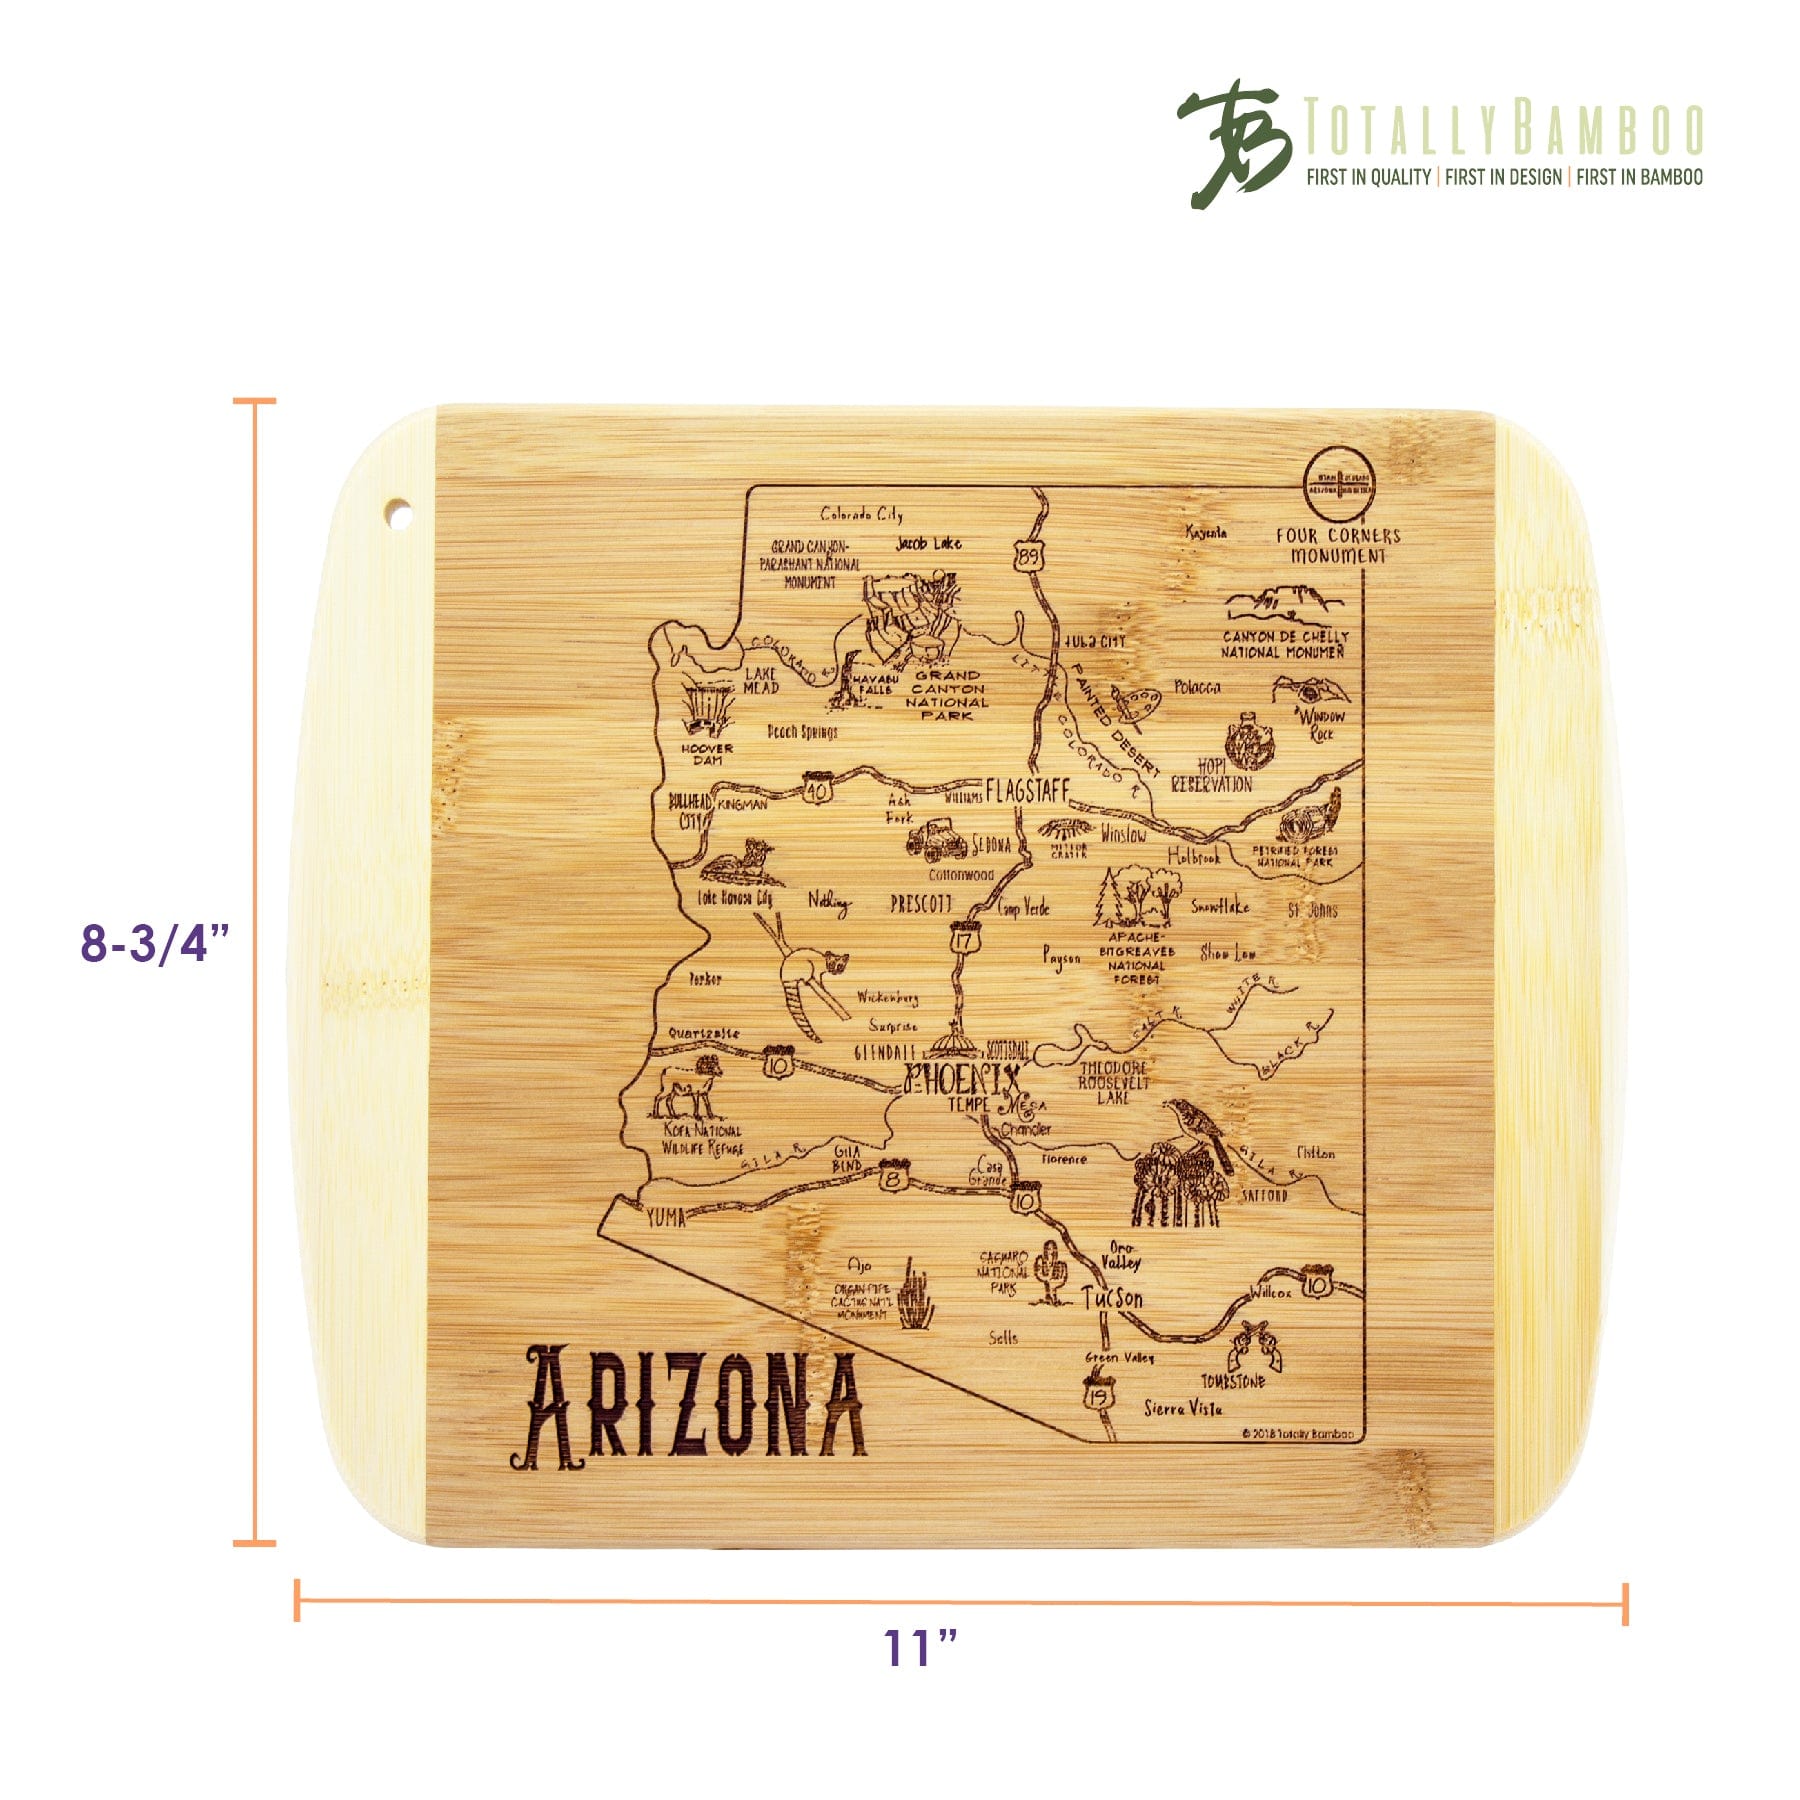 Totally Bamboo A Slice of Life Arizona Serving and Cutting Board, 11" x 8-3/4"